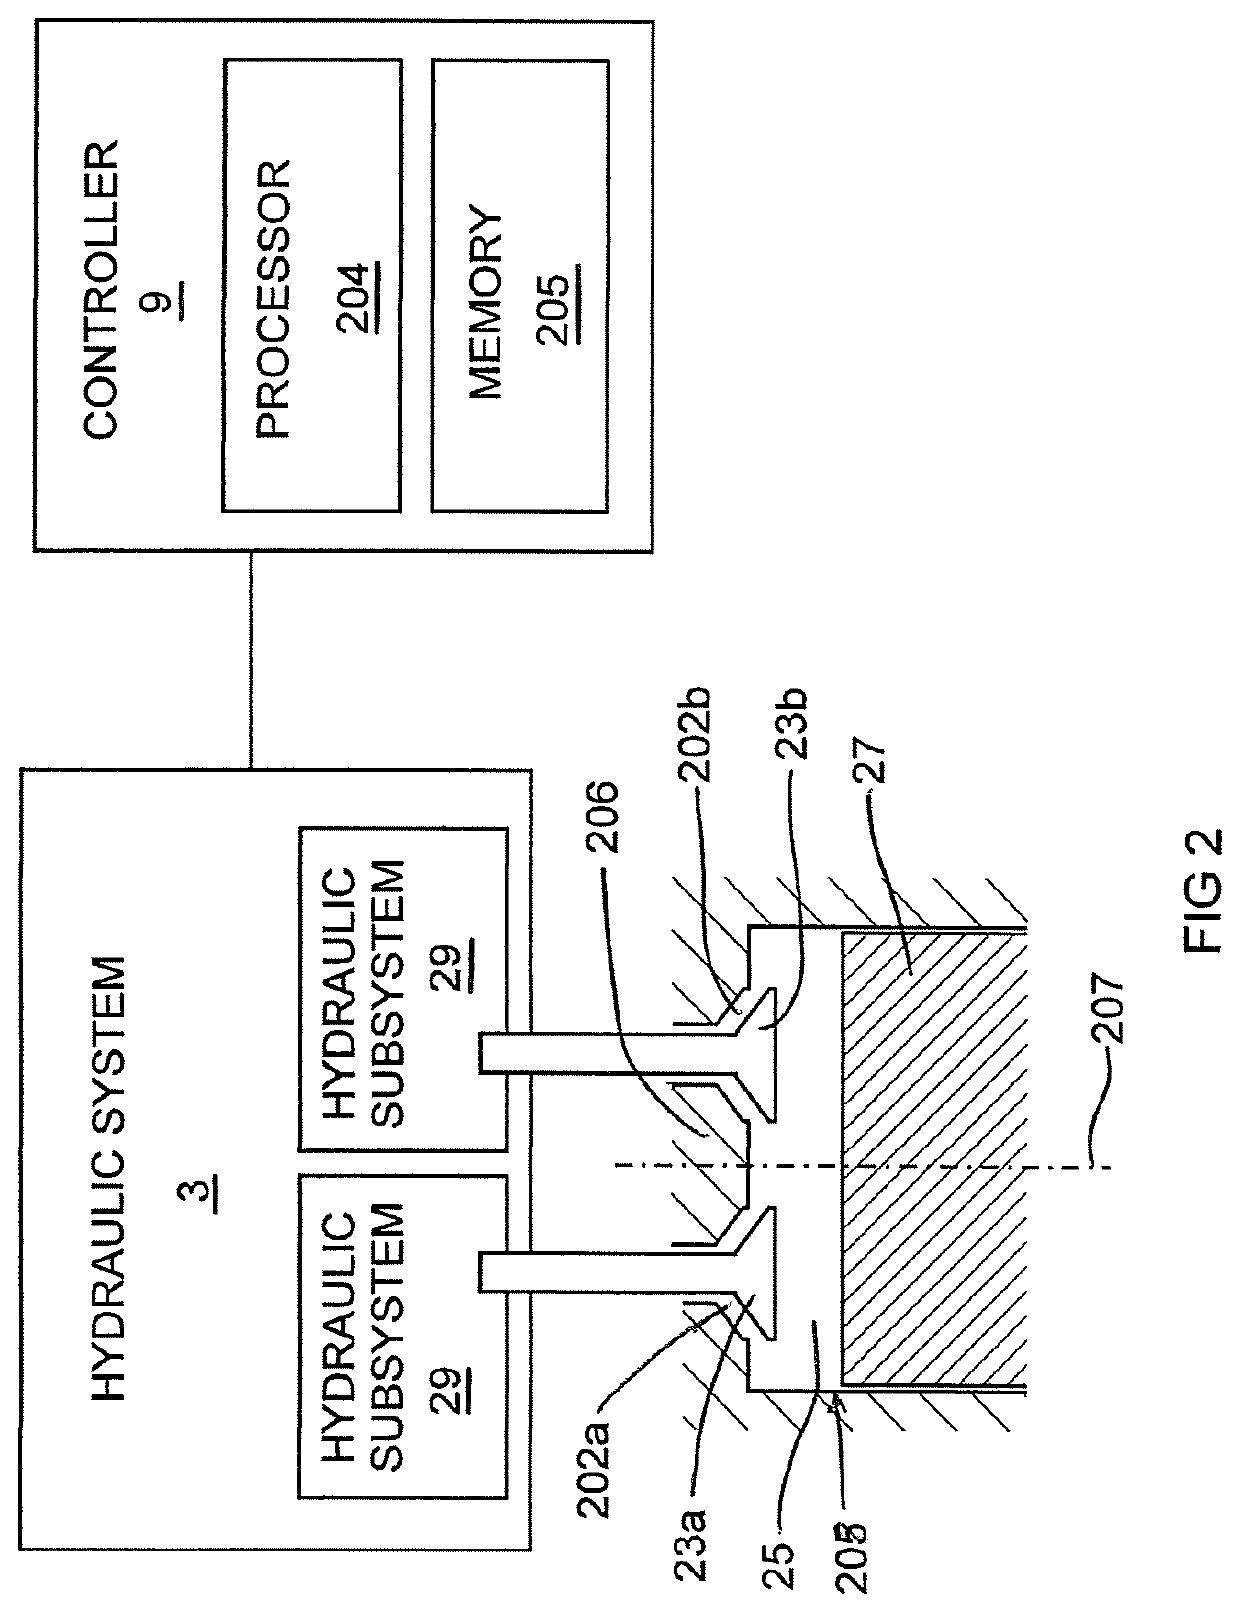 Controlling intake valves in an internal combustion engine